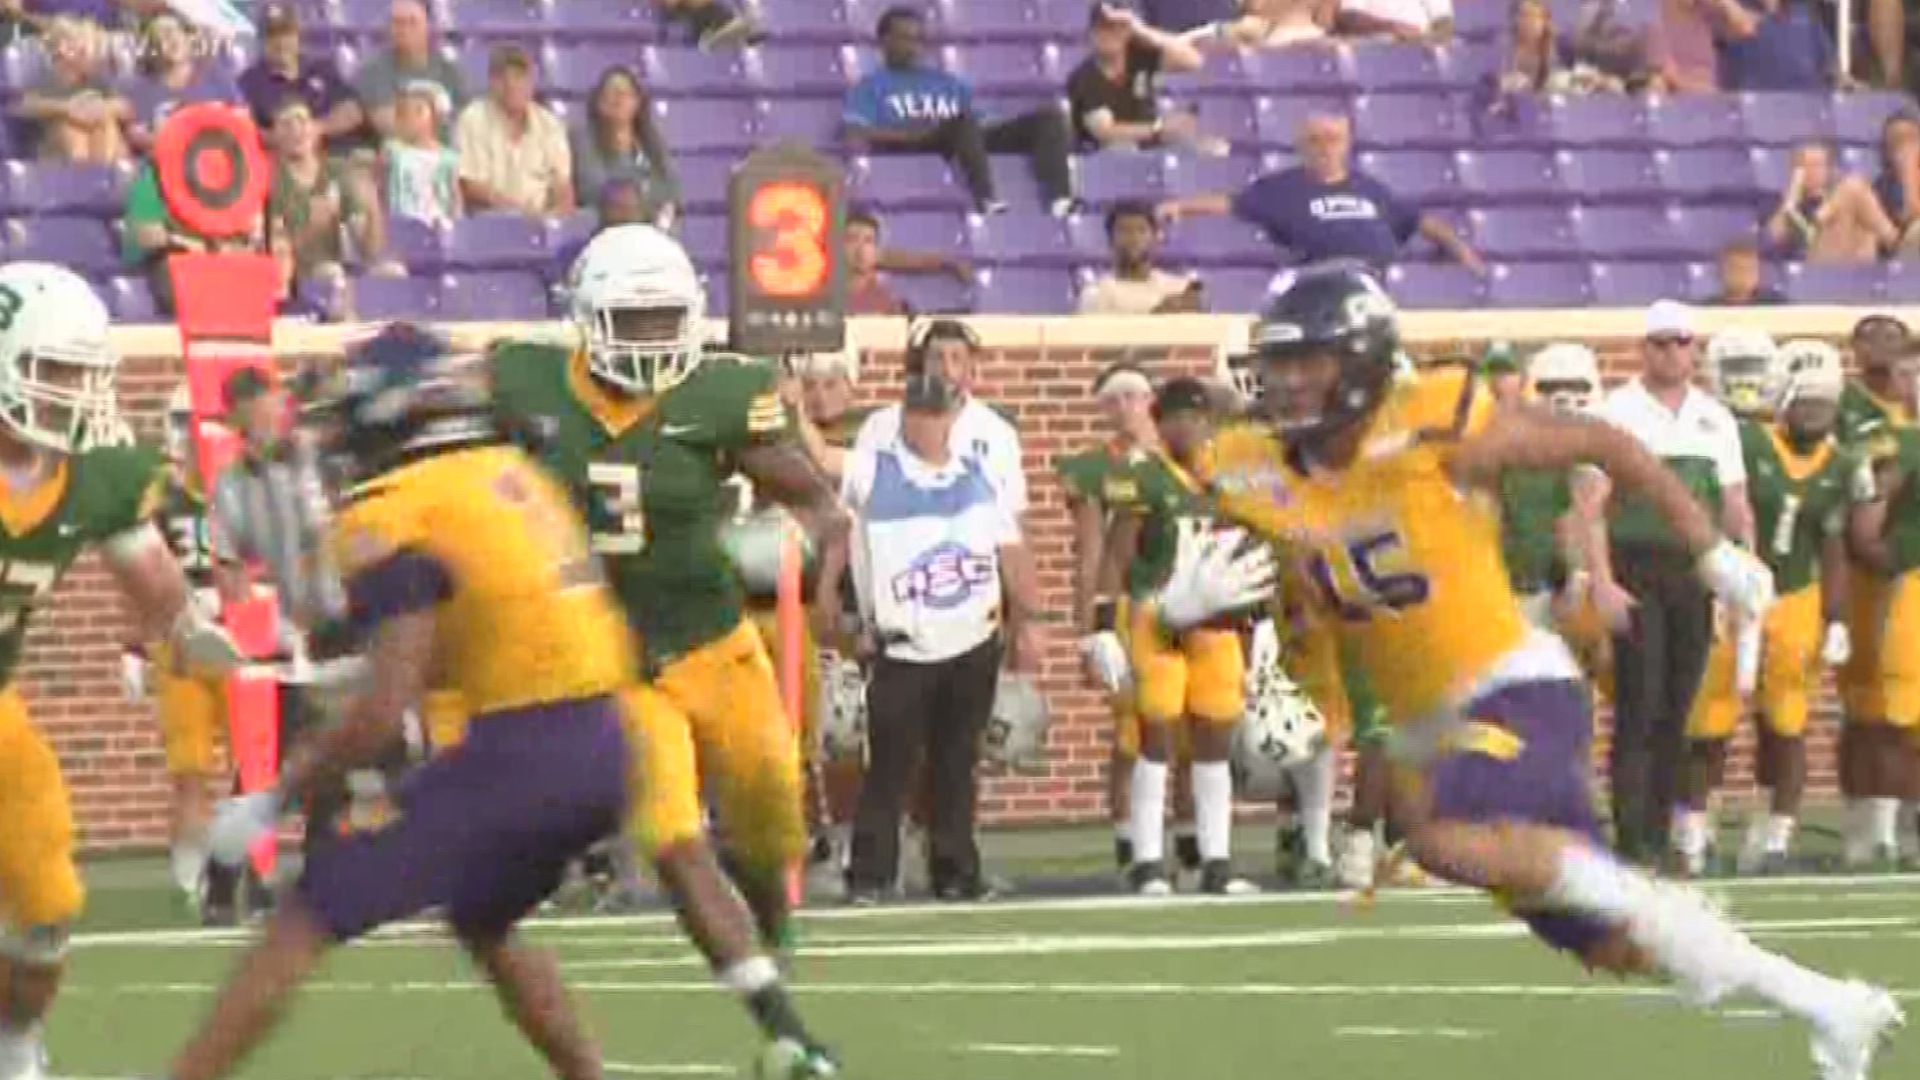 The Cru was able to hold off the Blazers 23-13 Saturday.